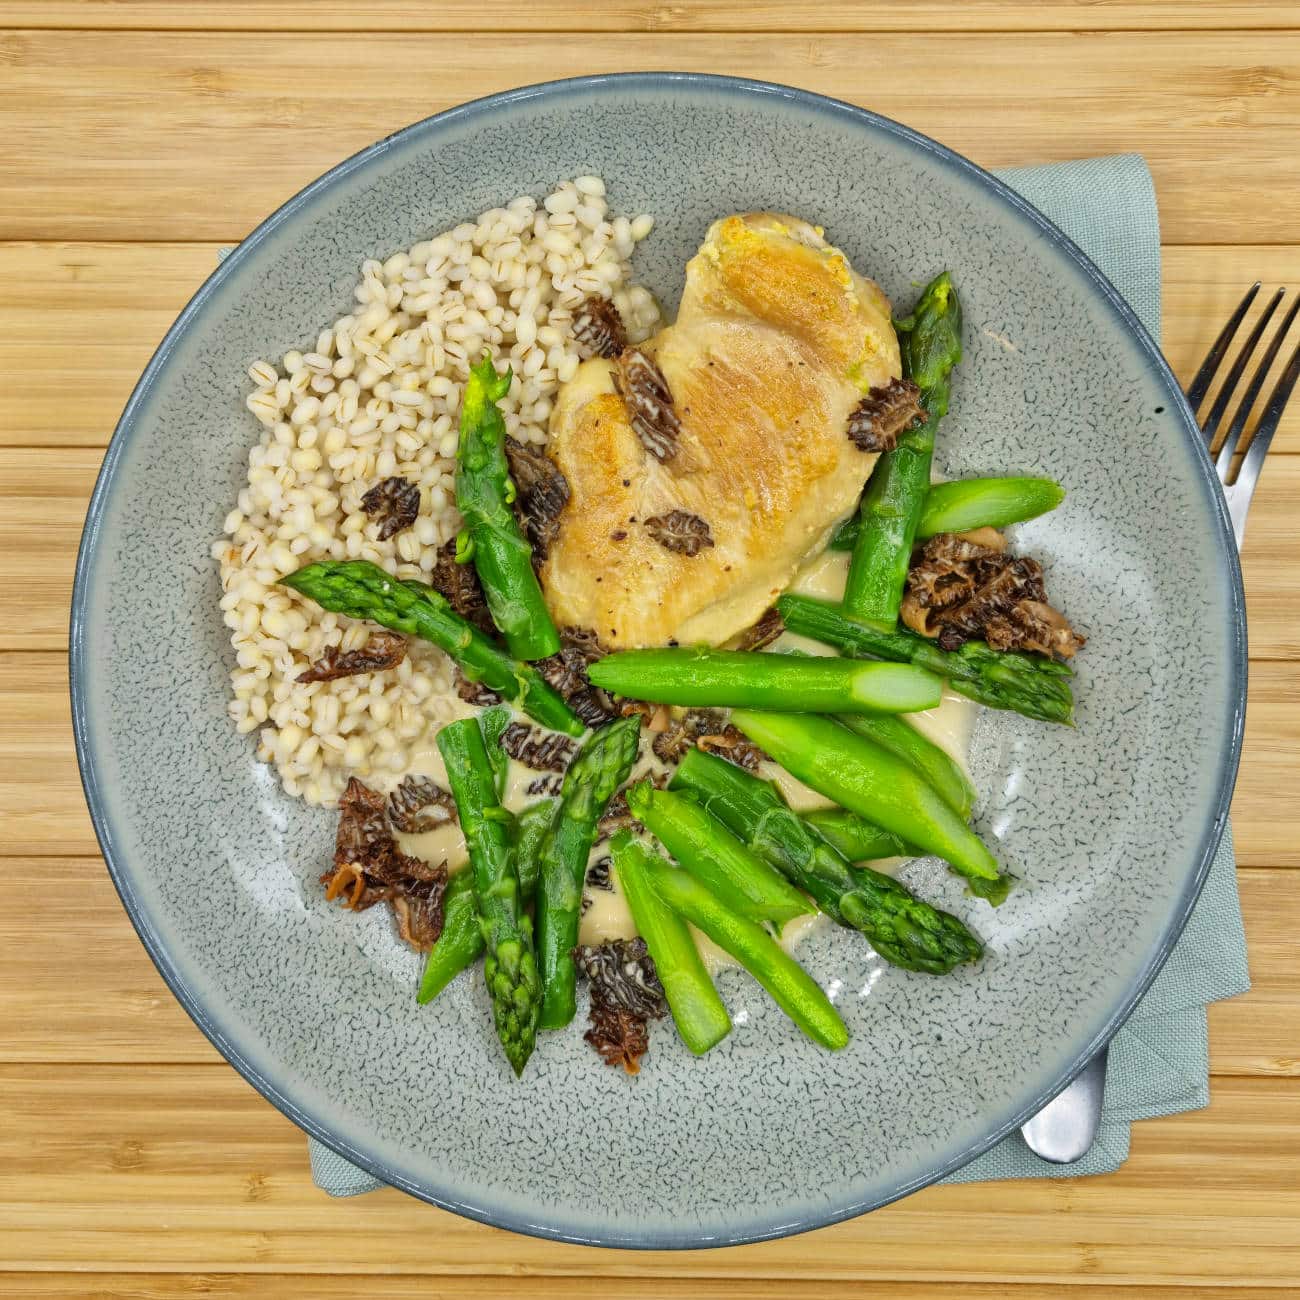 Fricassee of poultry, asparagus and morels - Fit meal